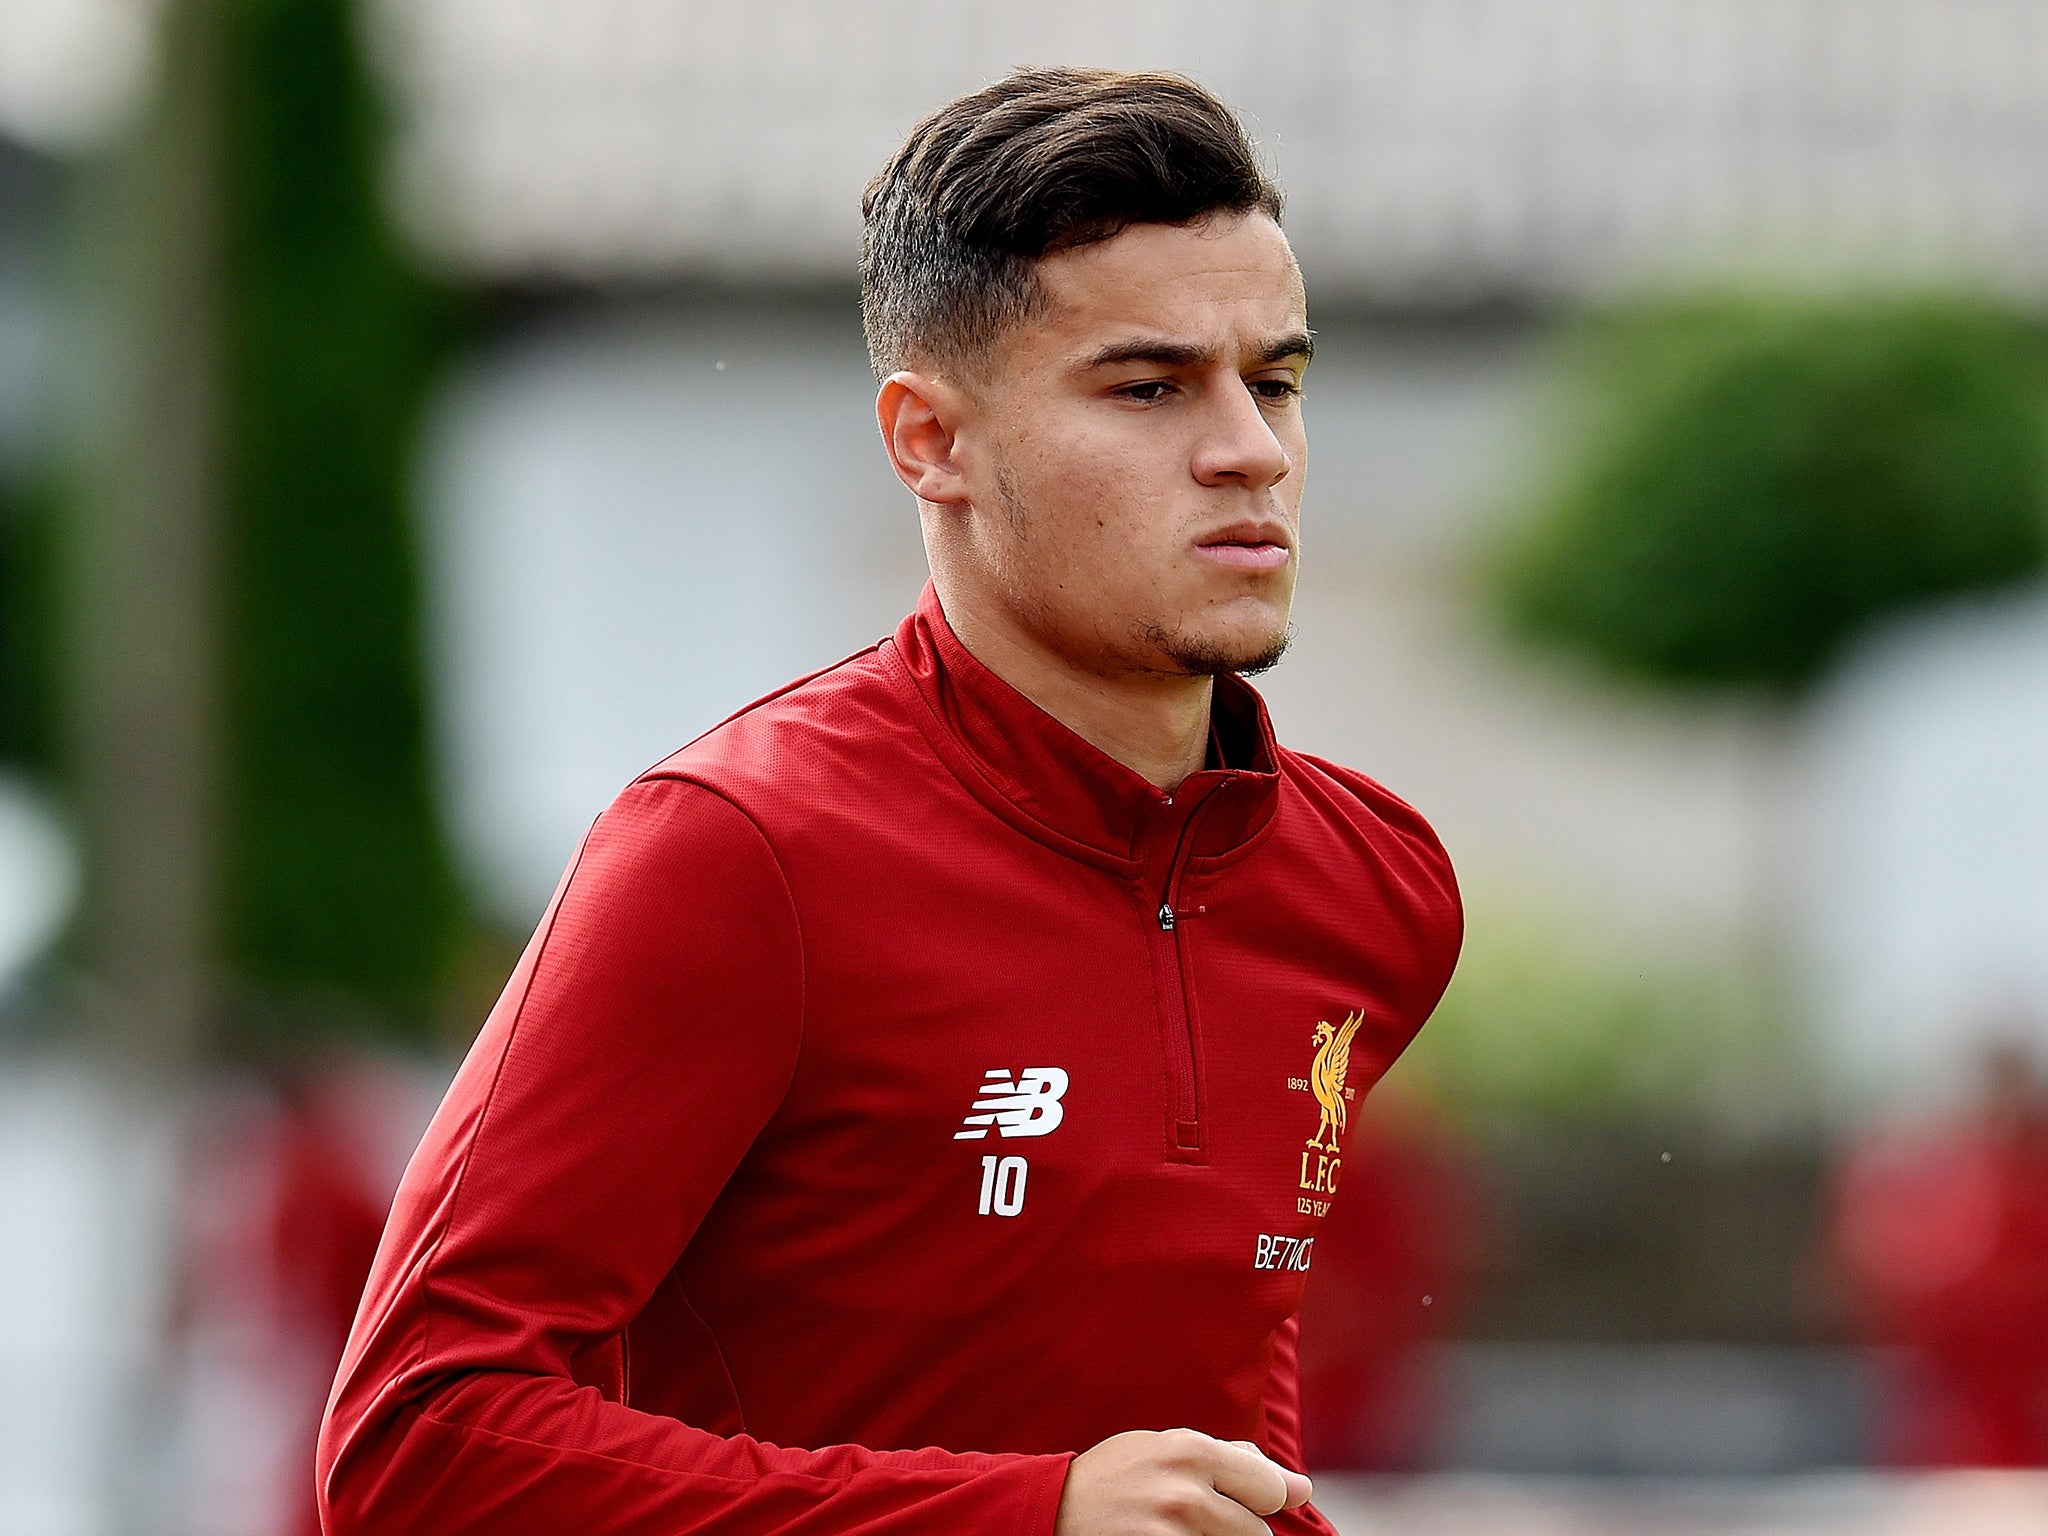 Philippe Coutinho is set to stay at Anfield for the forthcoming season